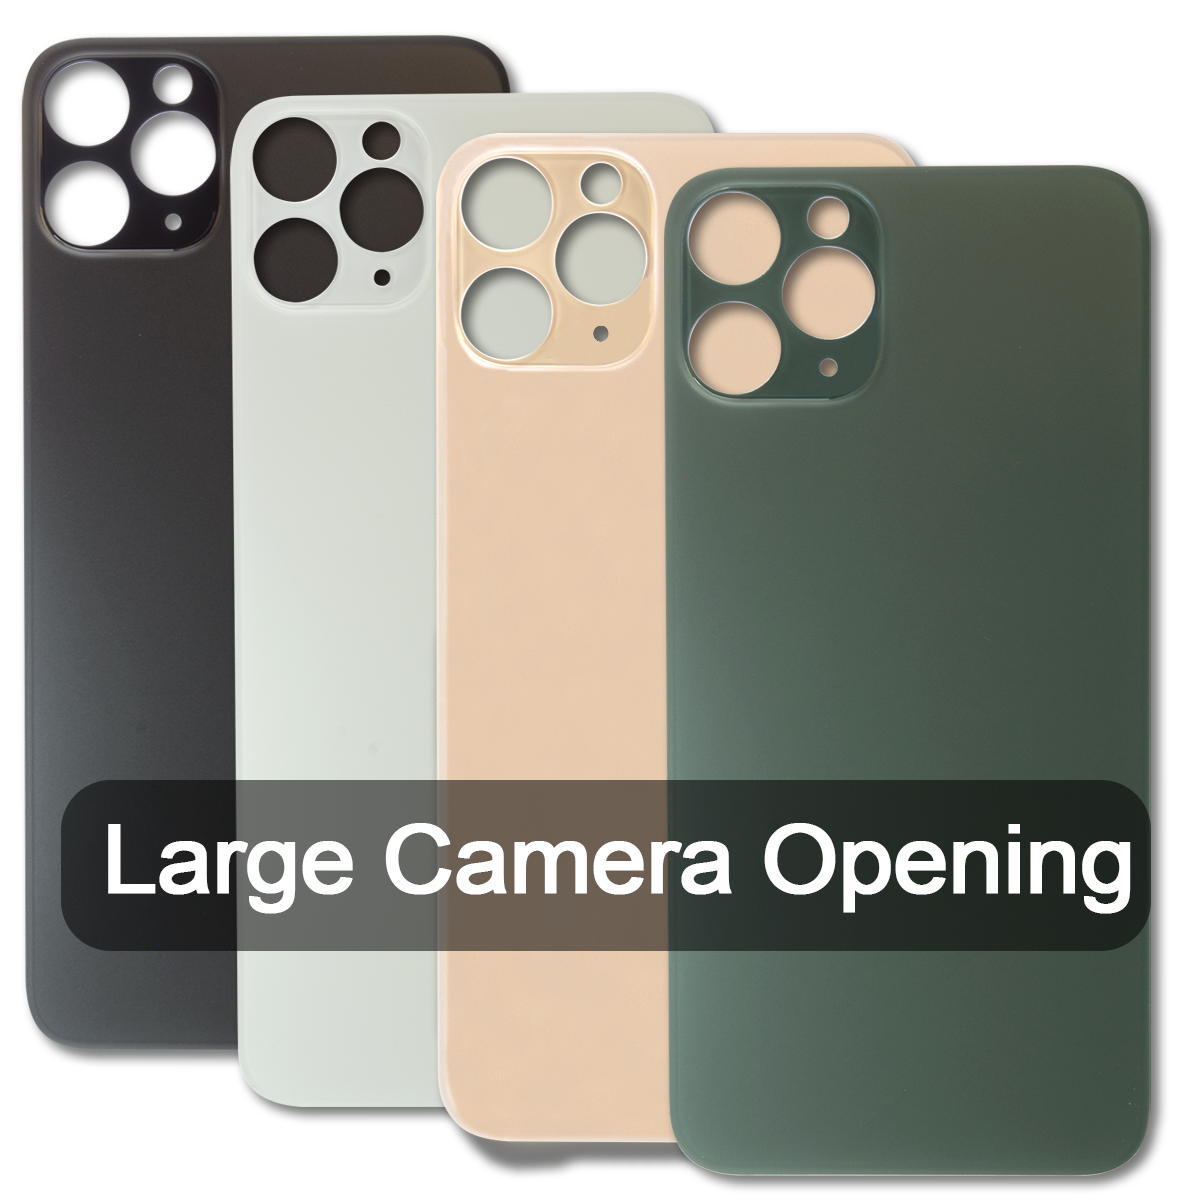 iPhone 11 Pro Max Rear Glass Cover Replacement with Large Camera Opening